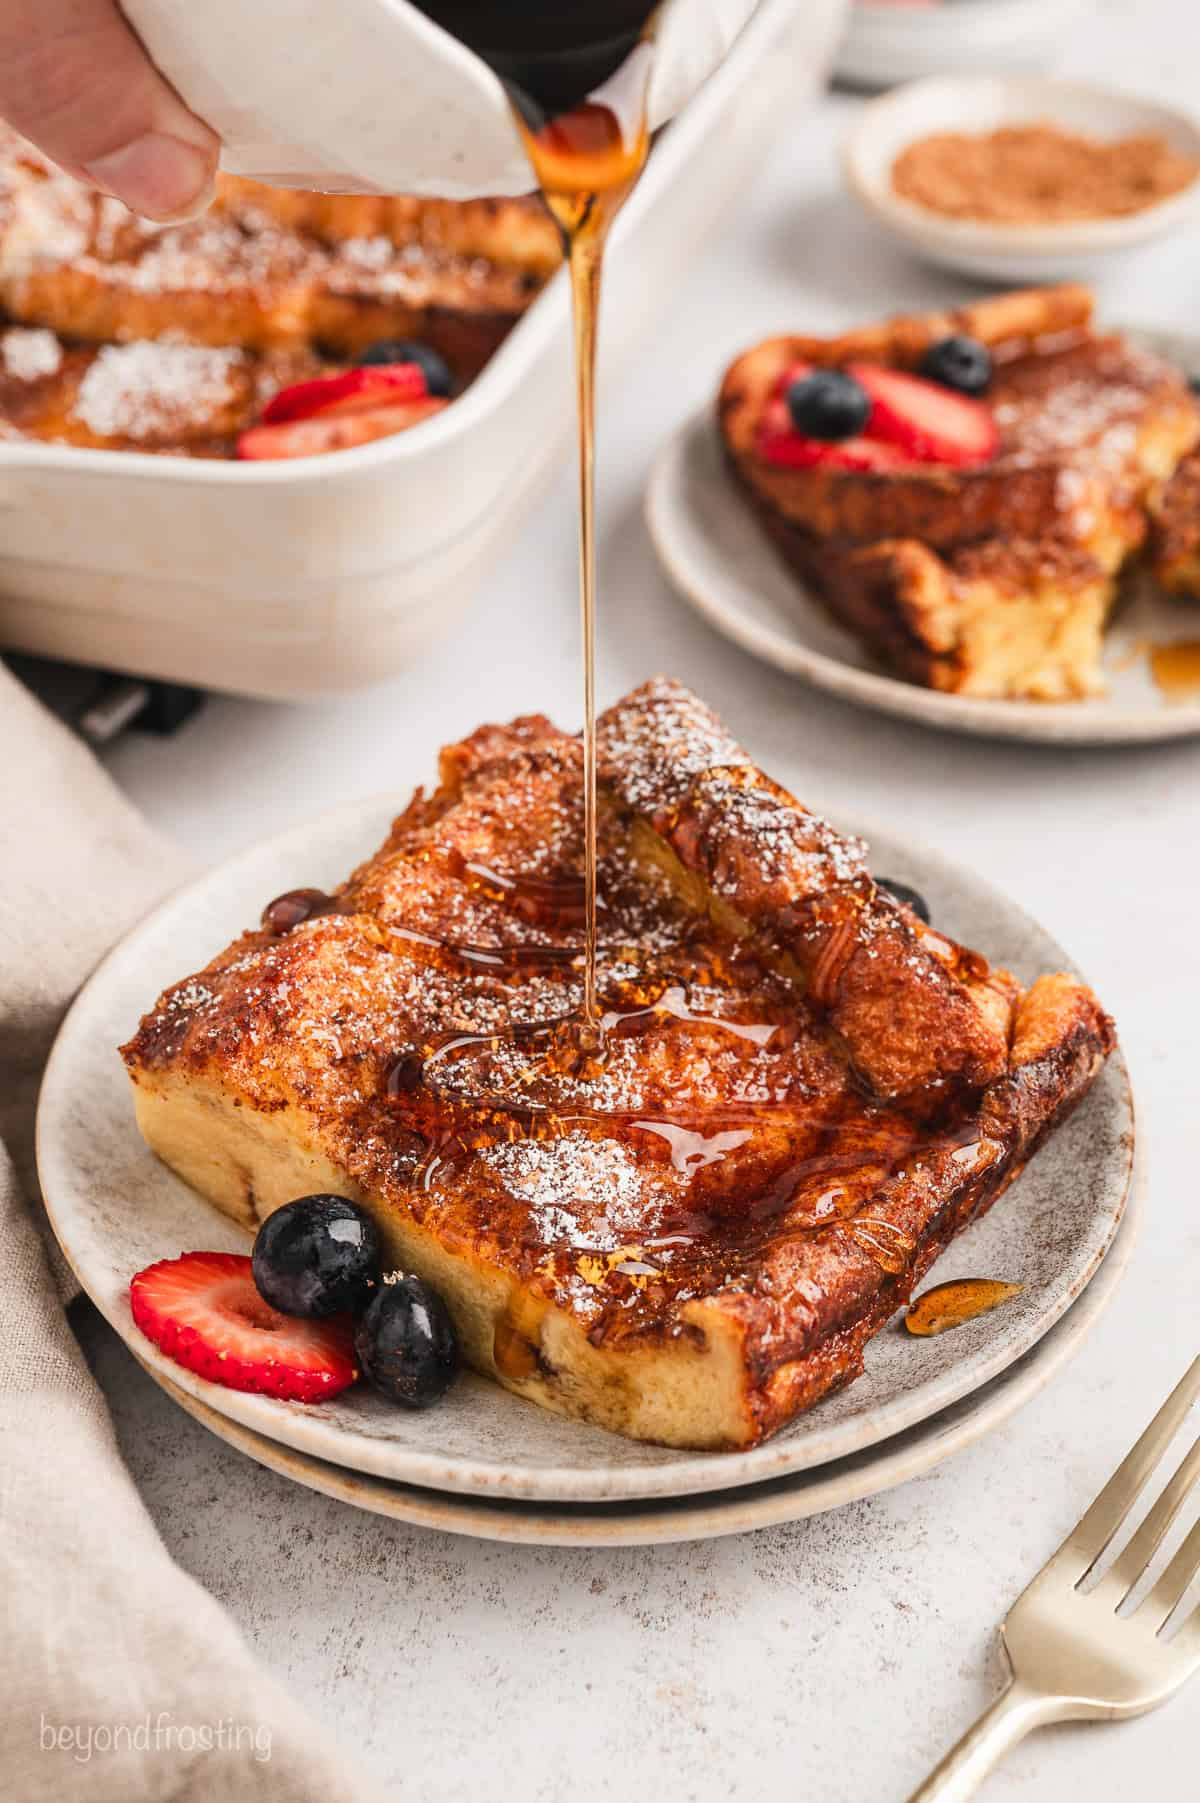 Maple syrup is drizzled from a jug over top of a slice of brioche French toast on a plate, with the casserole in the background.